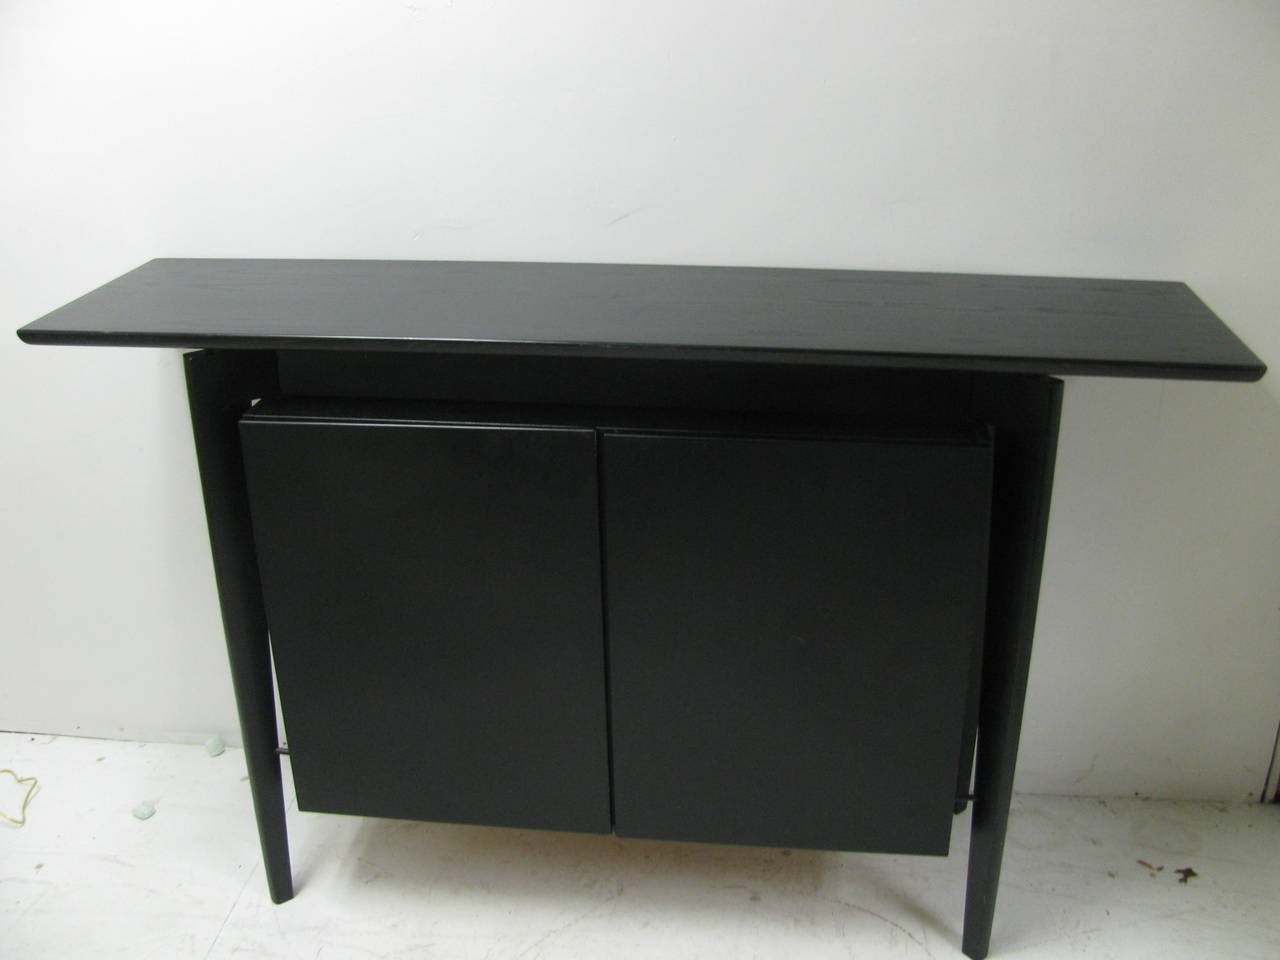 Simple and elegant sideboard or bar cabinet. Beautifully designed and well constructed by the Danish Co. Skovby. Ebonized oak with the cabinet floating between the legs. Two large drawers which open to reveal two drawers for some storage, possibly